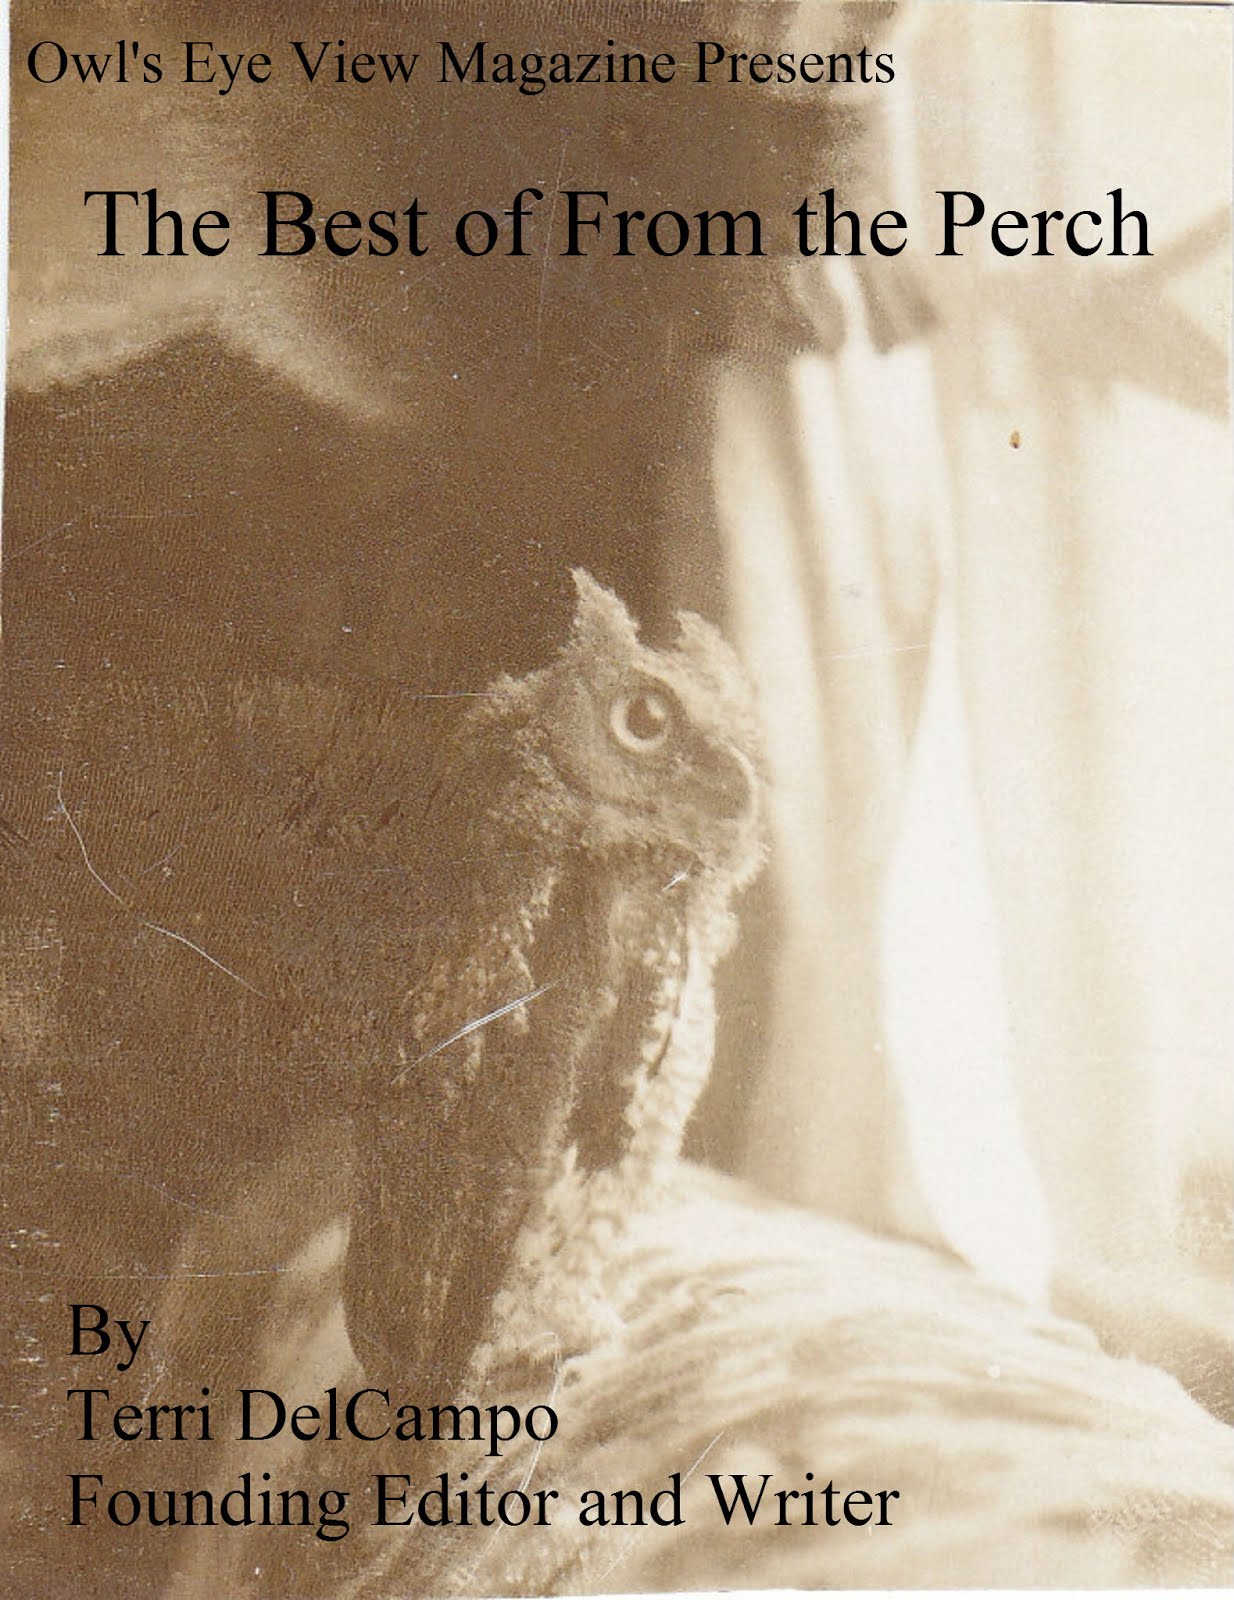 OEV Magazine Presents The Best of From the Perch